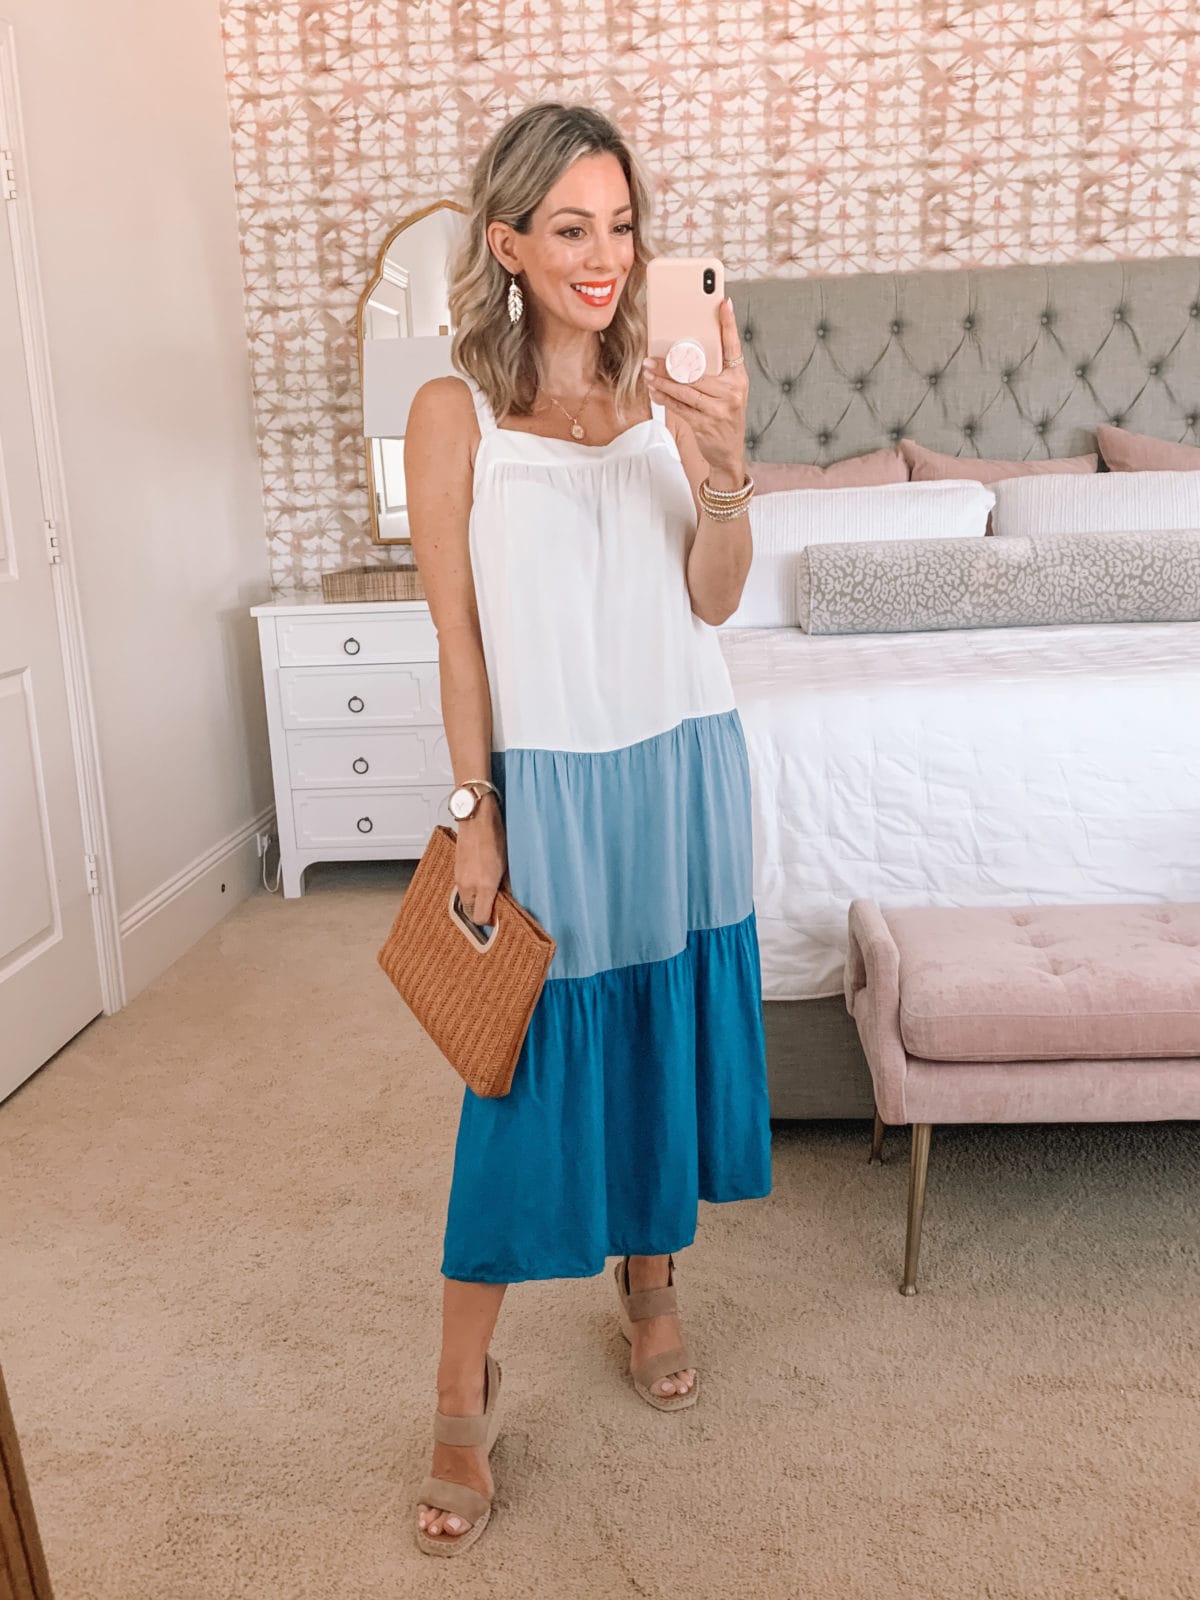 Amazon Fashion Faves, Blue Colorblock dress and Wedges